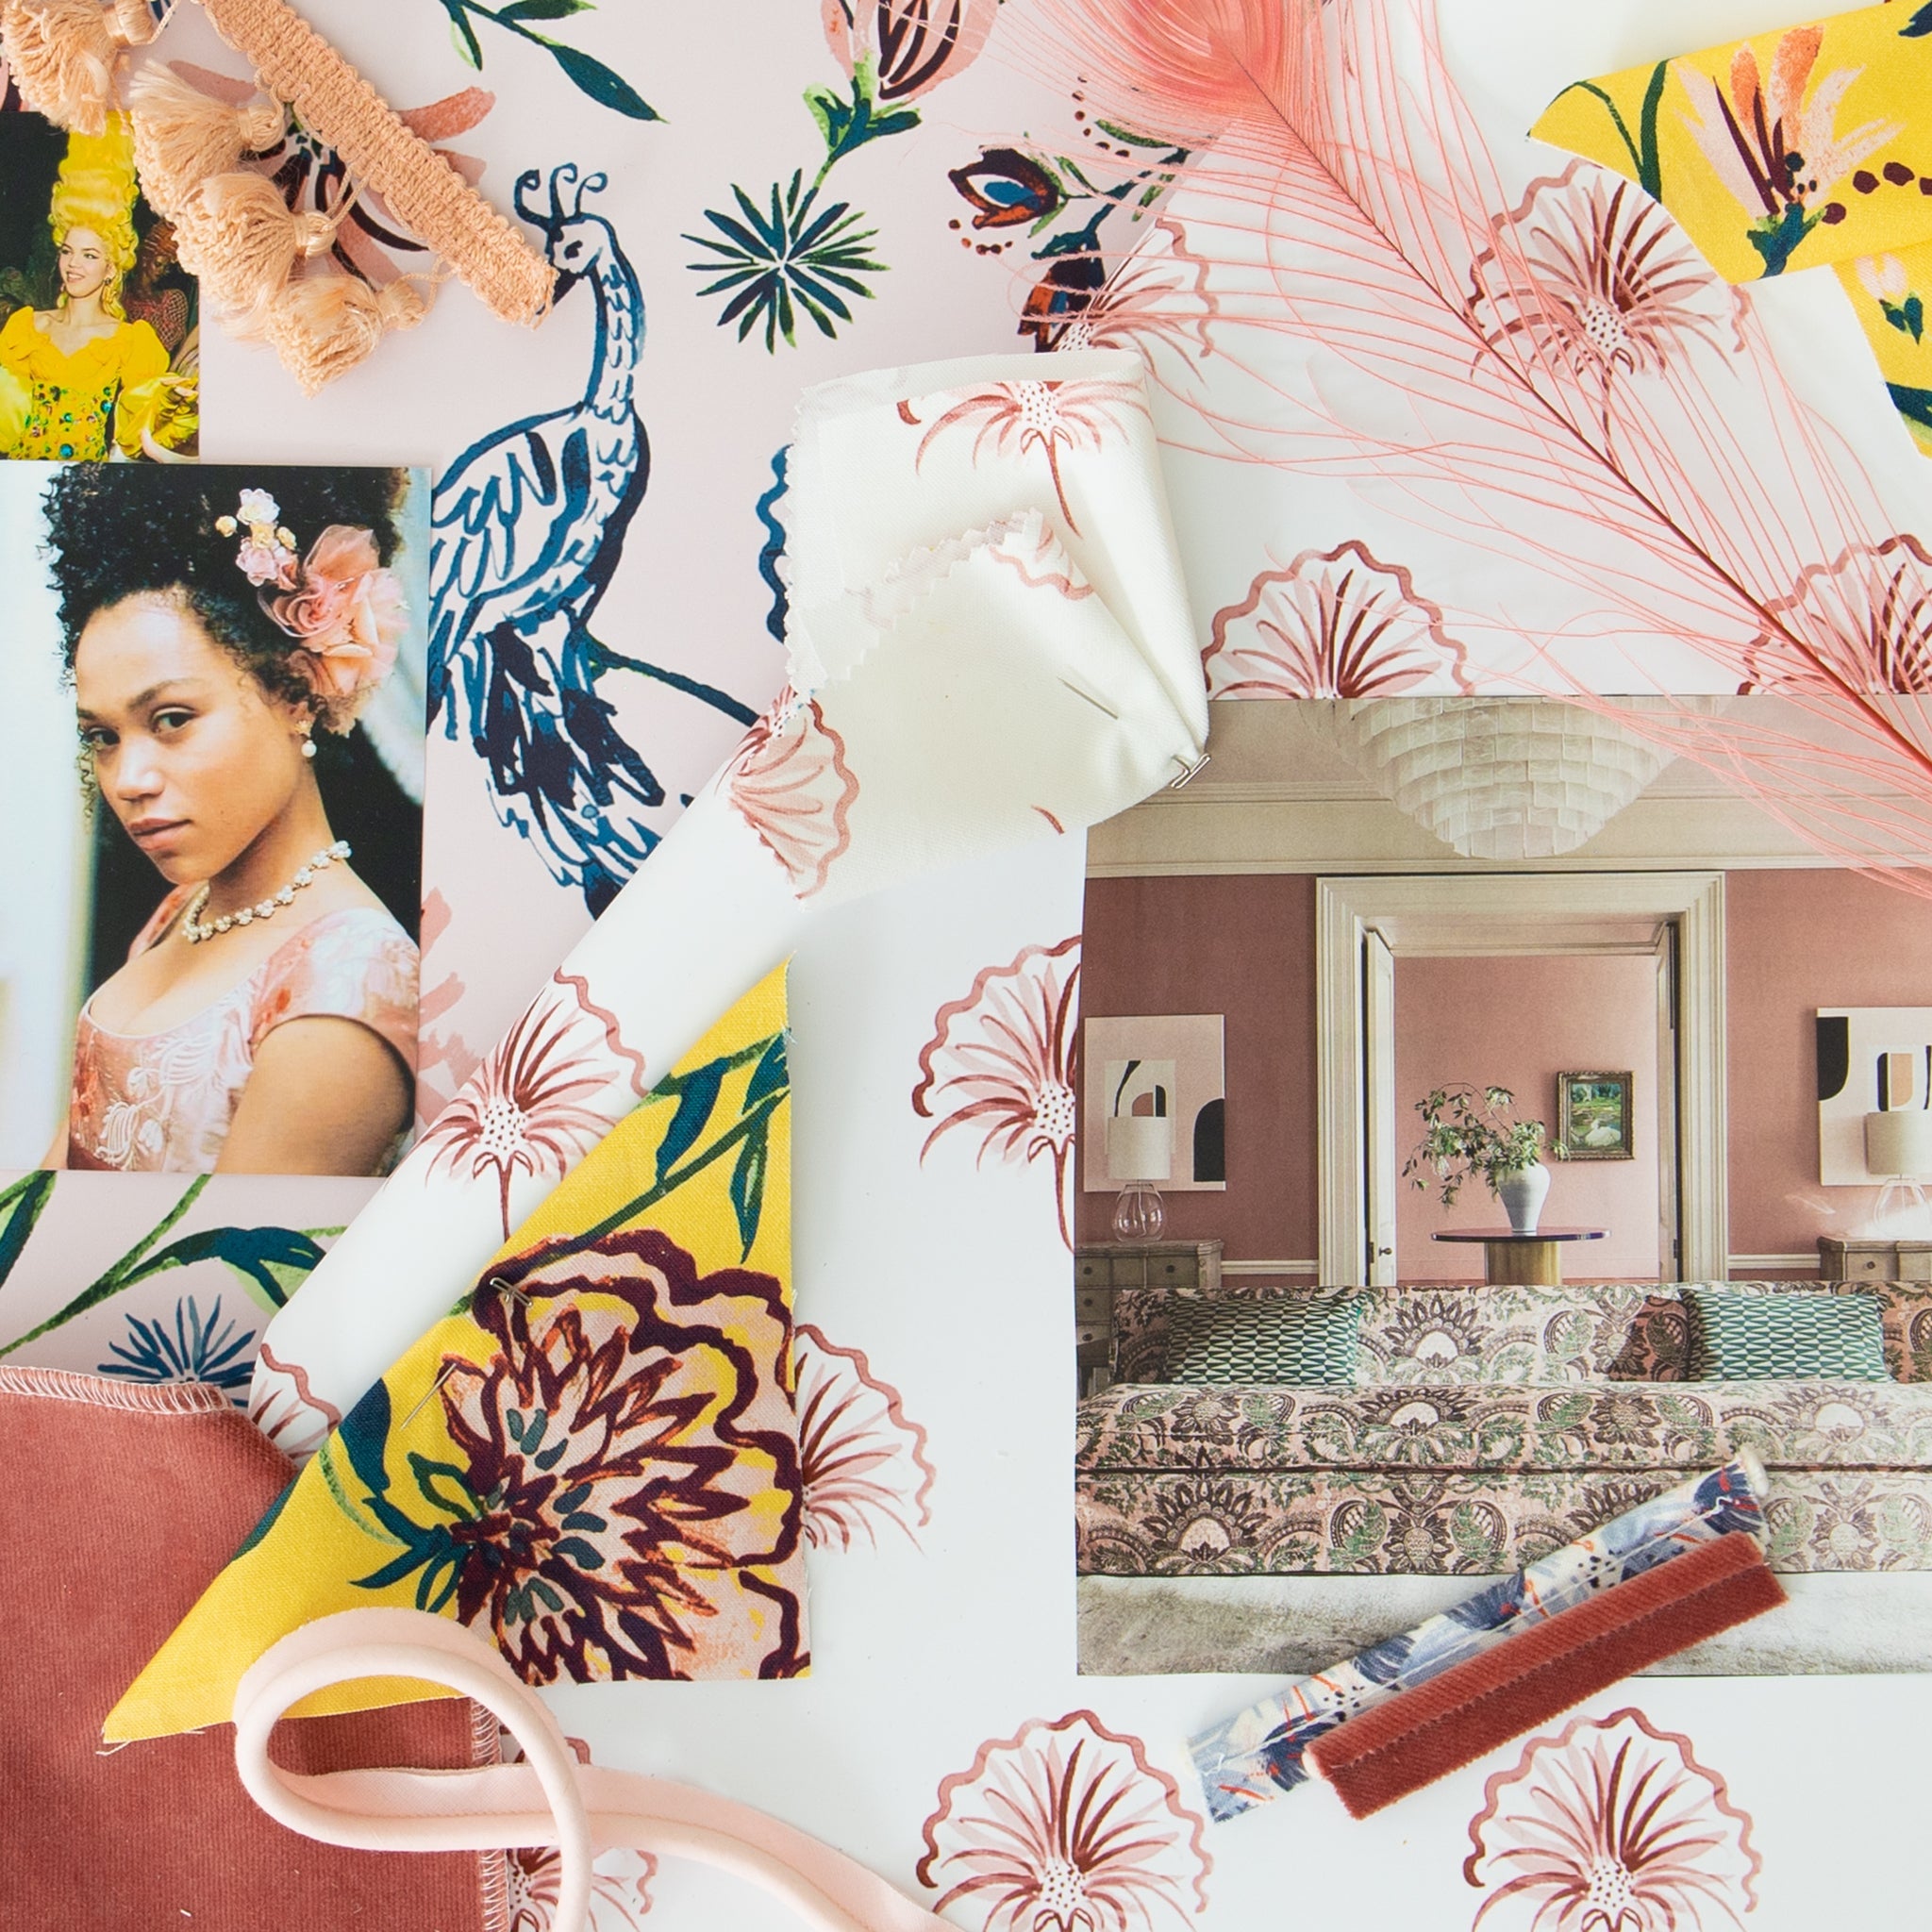 Interior design moodboard and fabric inspirations with Yellow Canary printed cotton, Rose Floral printed cotton swatch, and Coral Velvet swatch